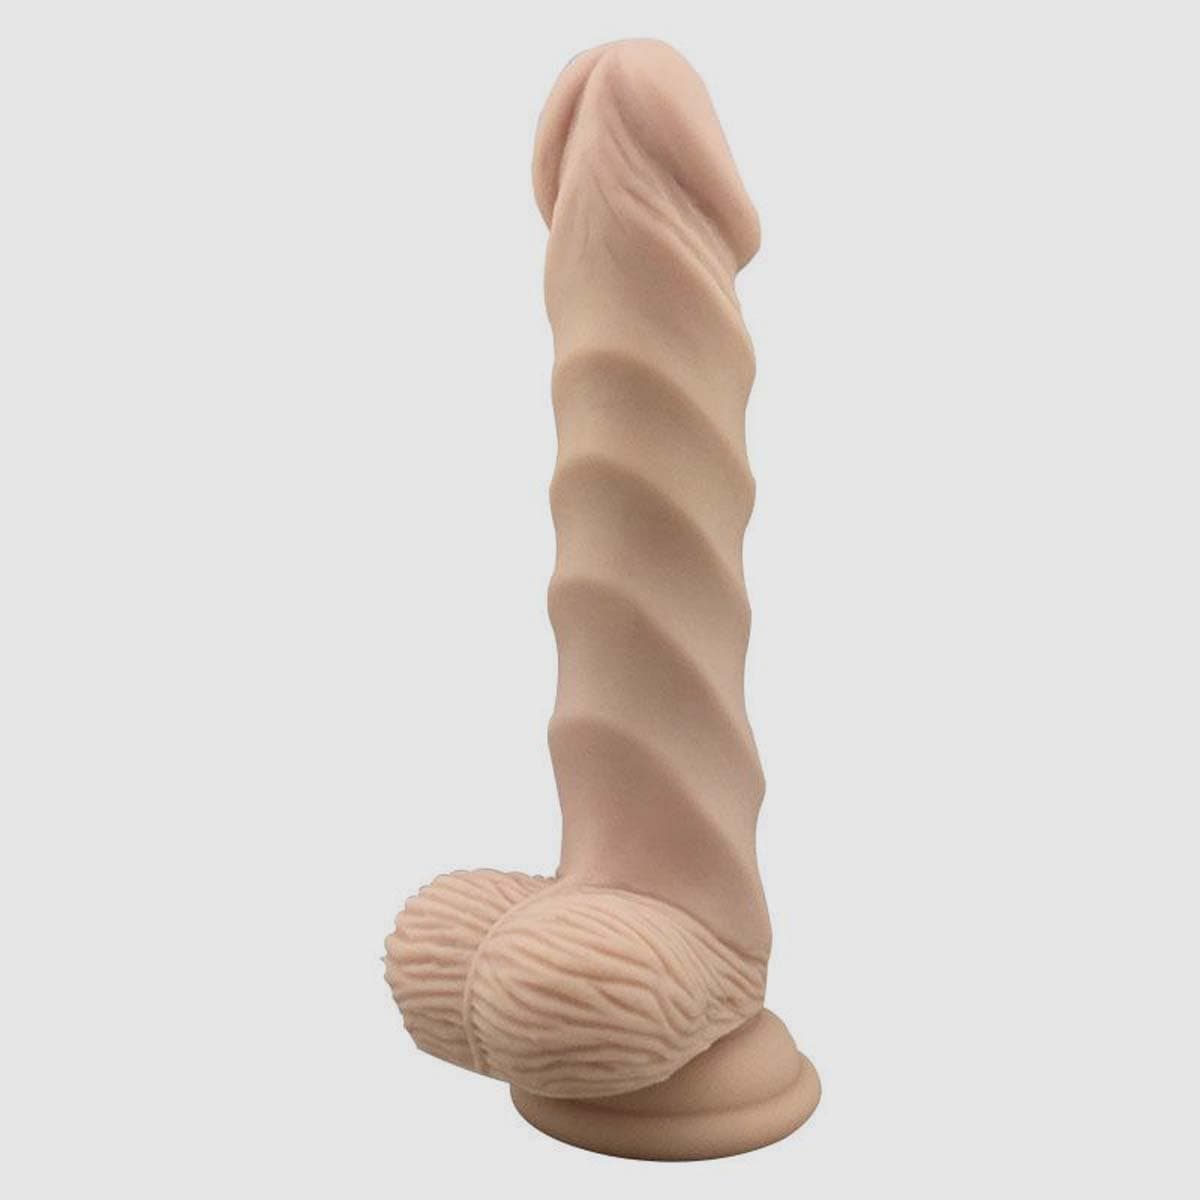 T&F Knight 8" Silicone Spiral Dildo - Flesh - Thorn & Feather Sex Toy Canada